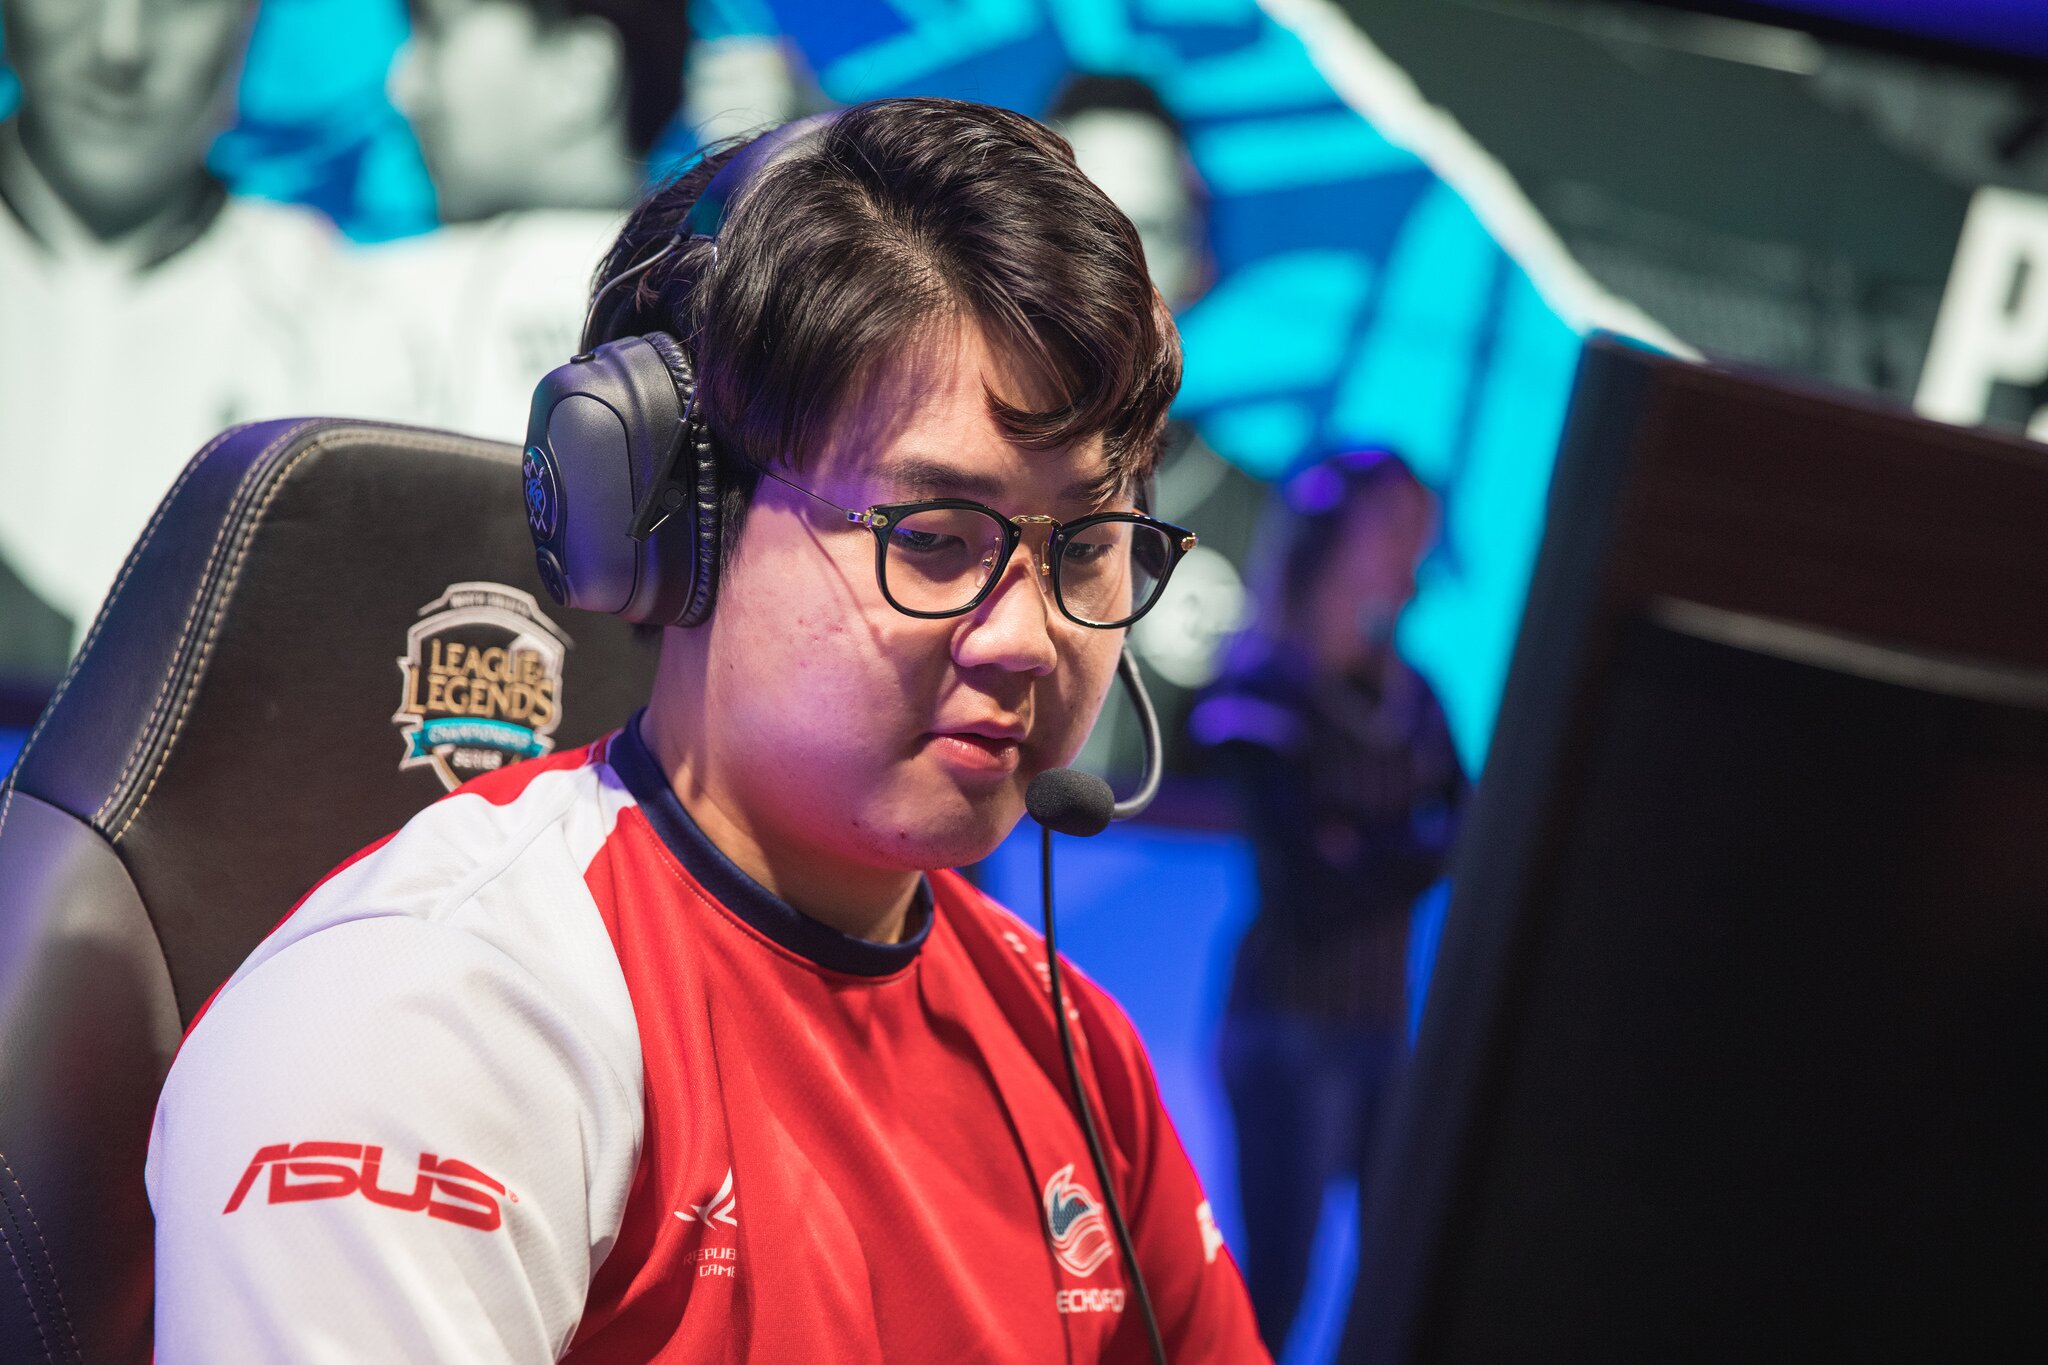 Huni will be the new centerpiece of Clutch Gaming after Febiven left to return to Europe.